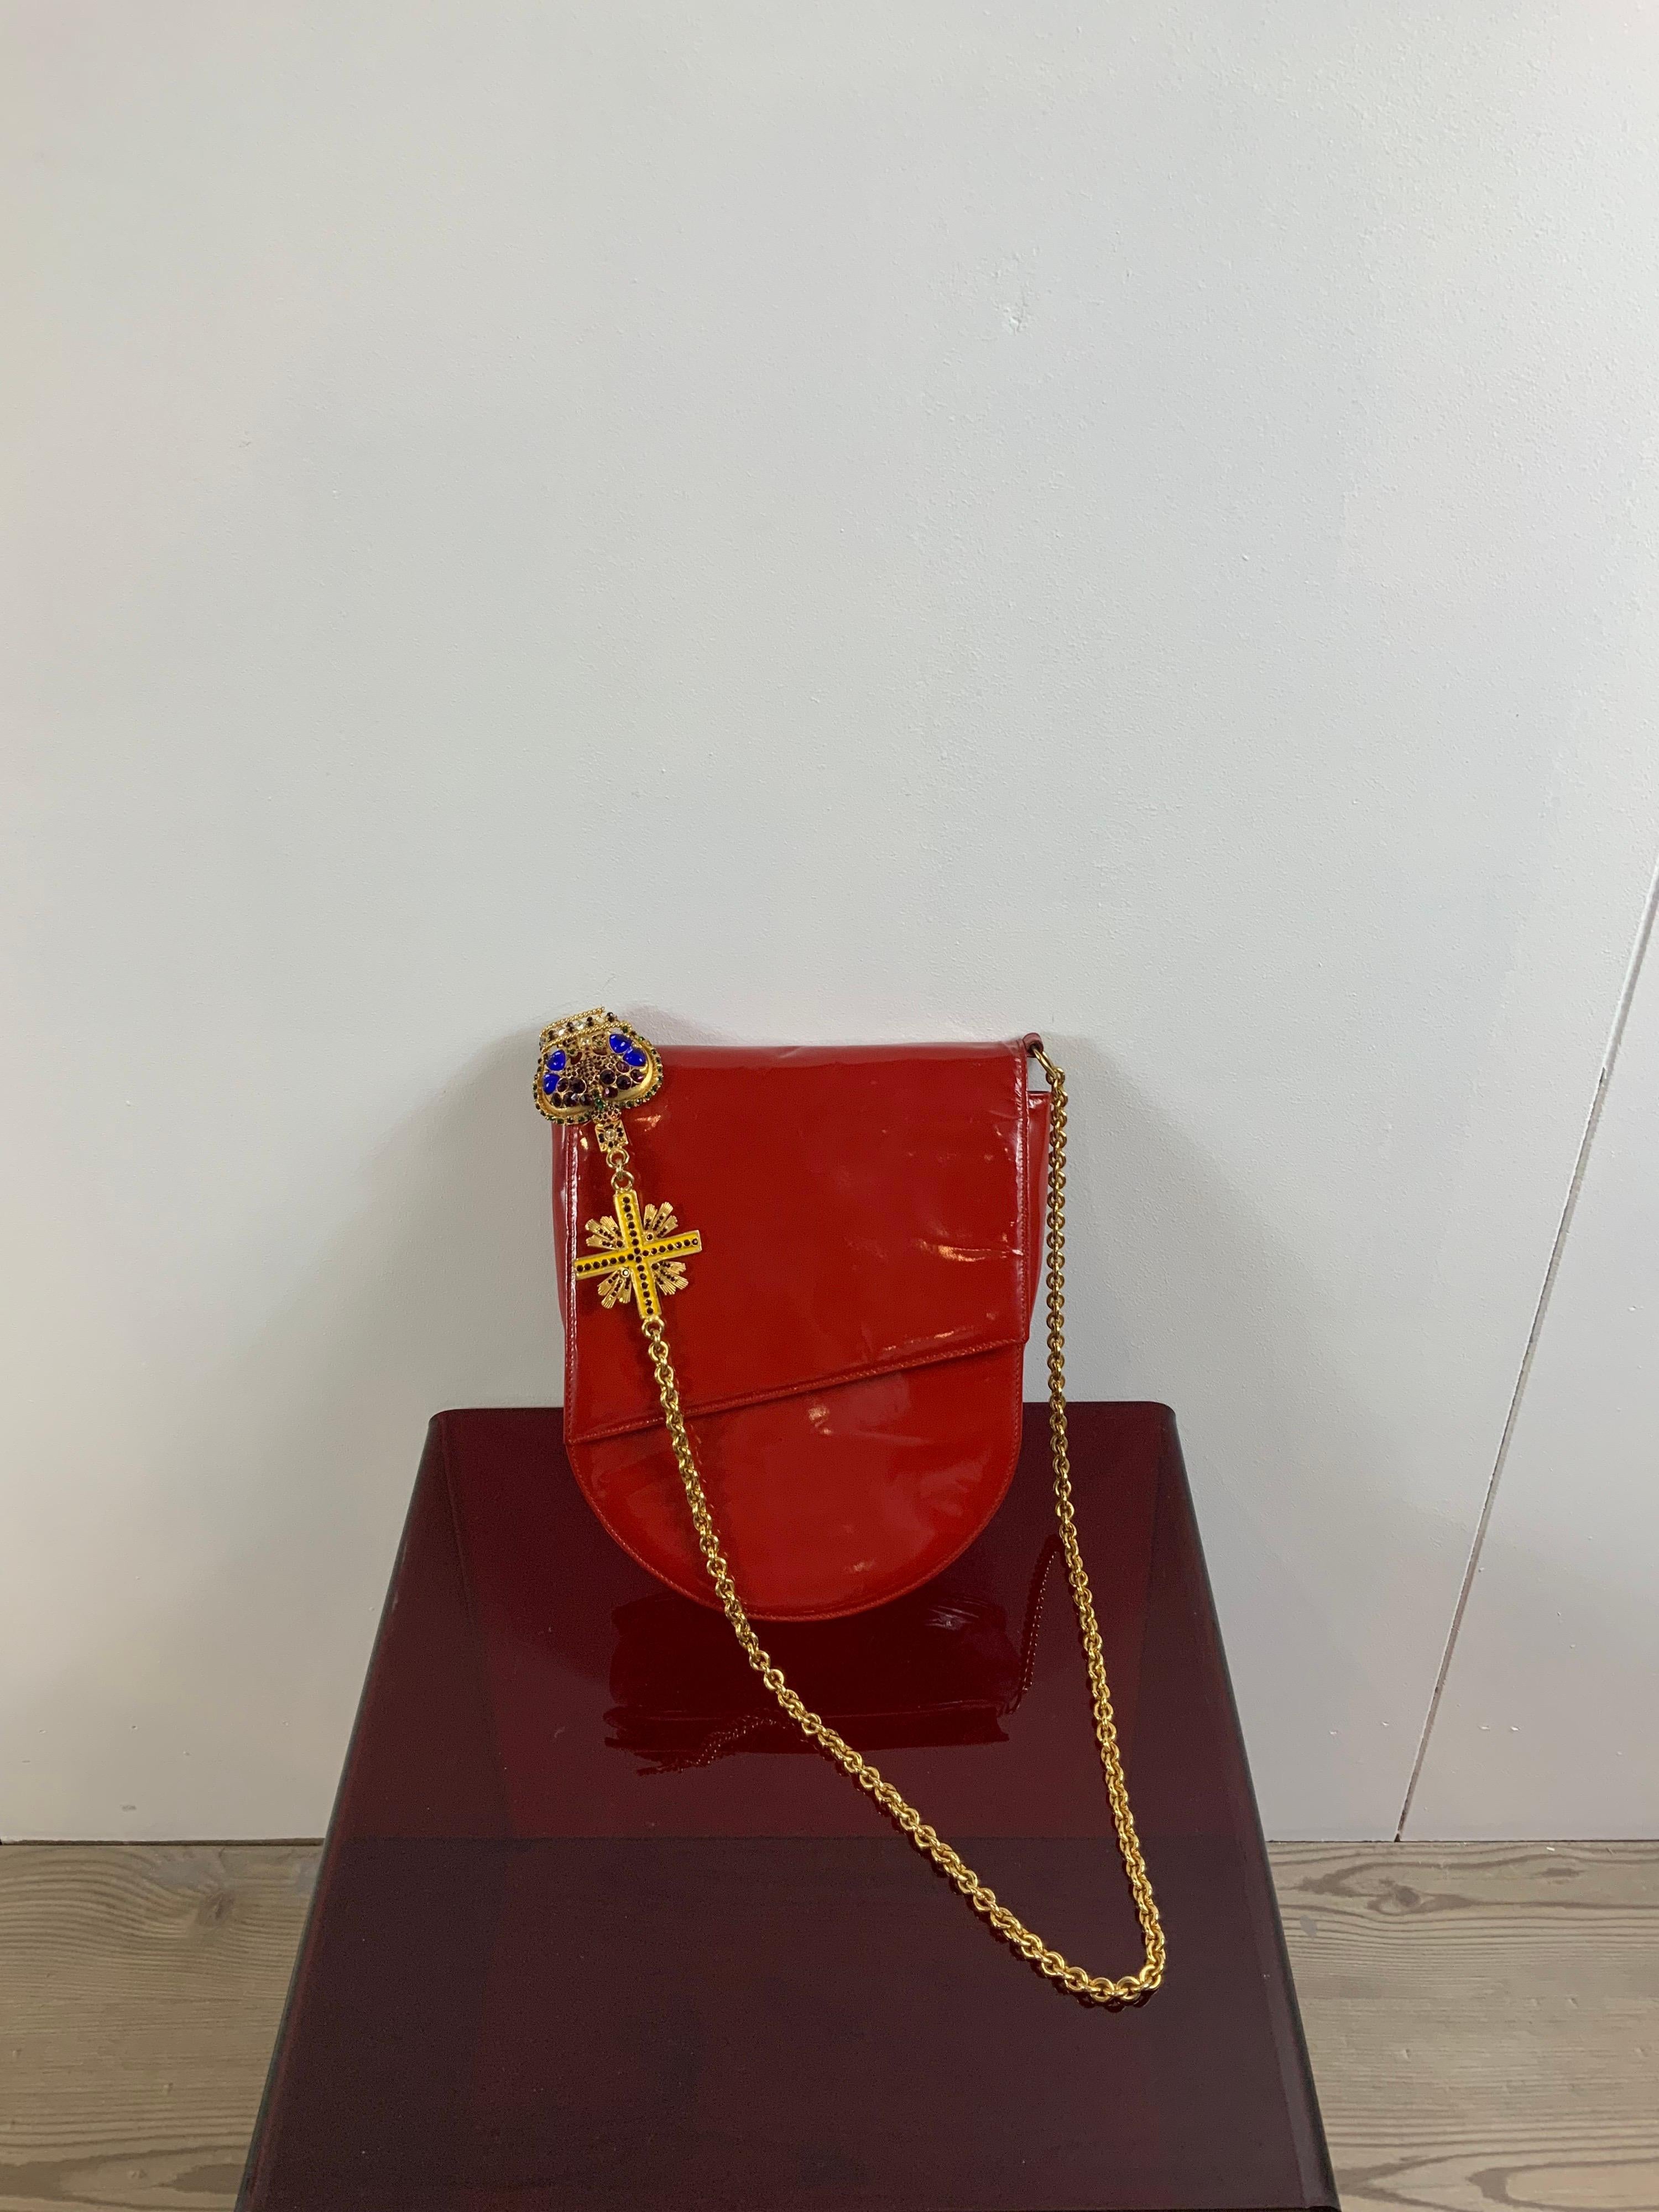 Gianni Versace vintage bag.
Red patent leather and gold hardware.
Featuring a shoulder chain and a cross & a crown as decorations. 
As you can see from the photos, the crown is broke and a little corner is missing.
Measurements 
height 26 cm
width